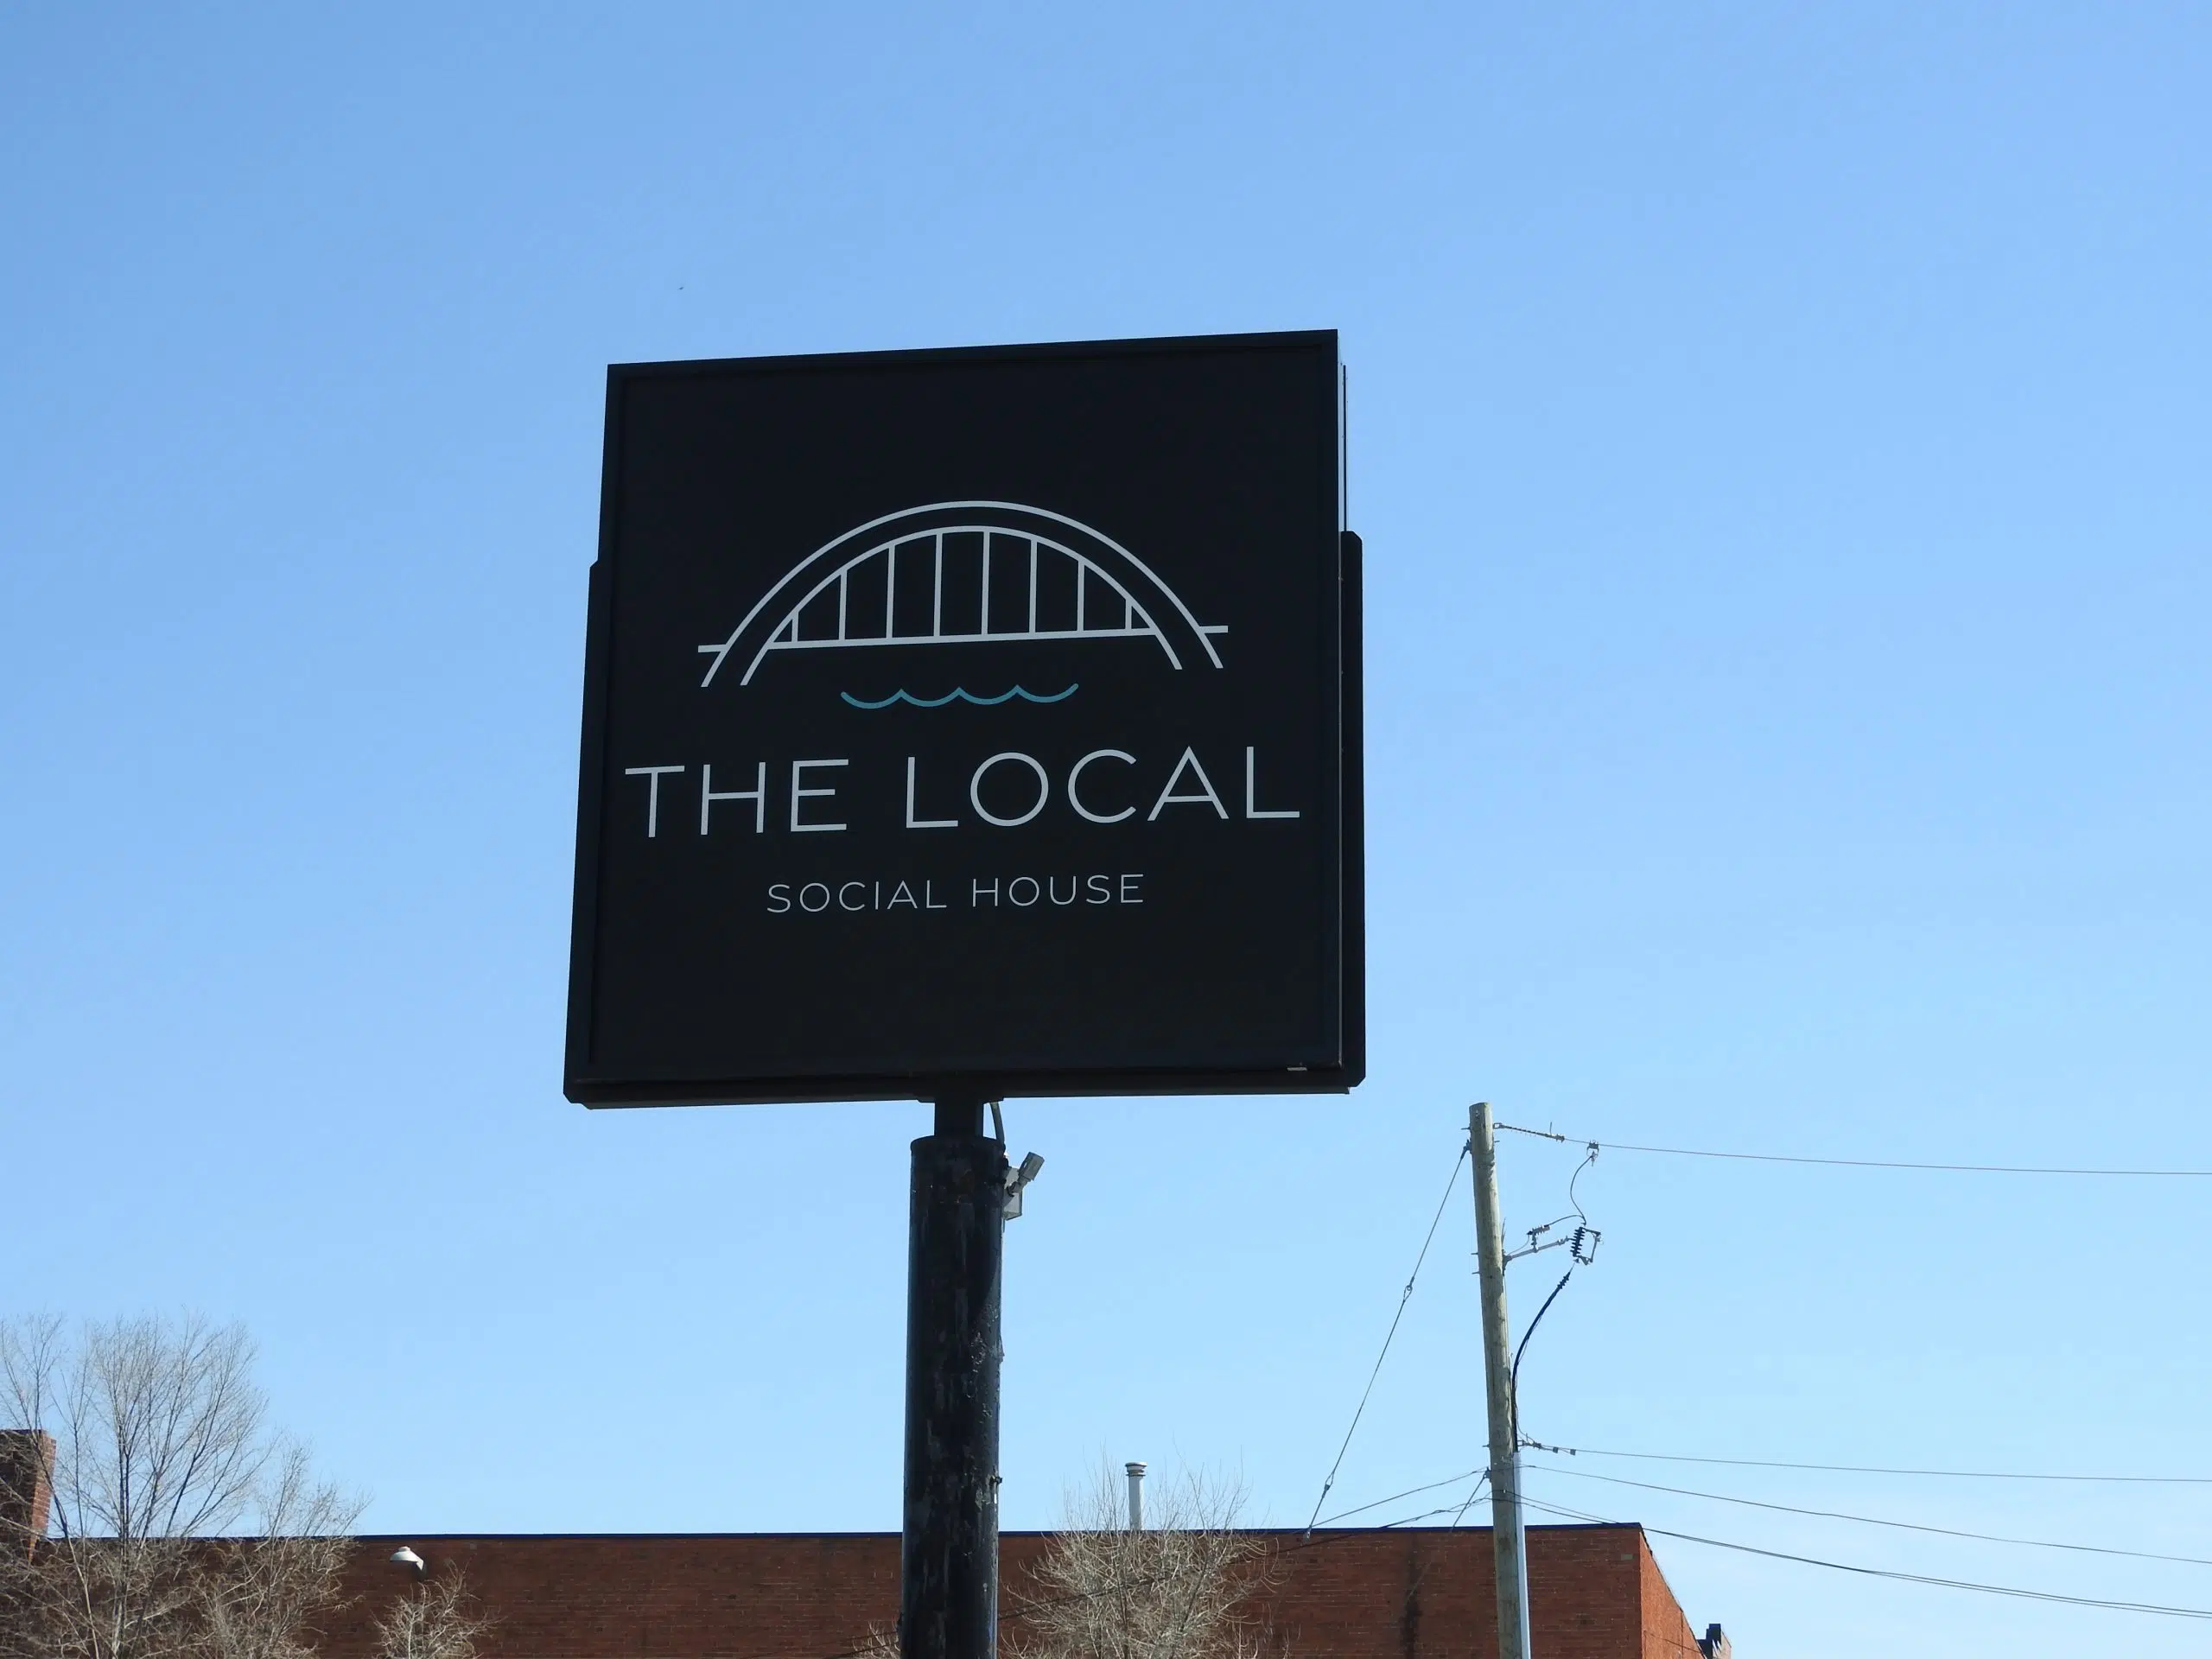 The Local Social House celebrates its grand opening